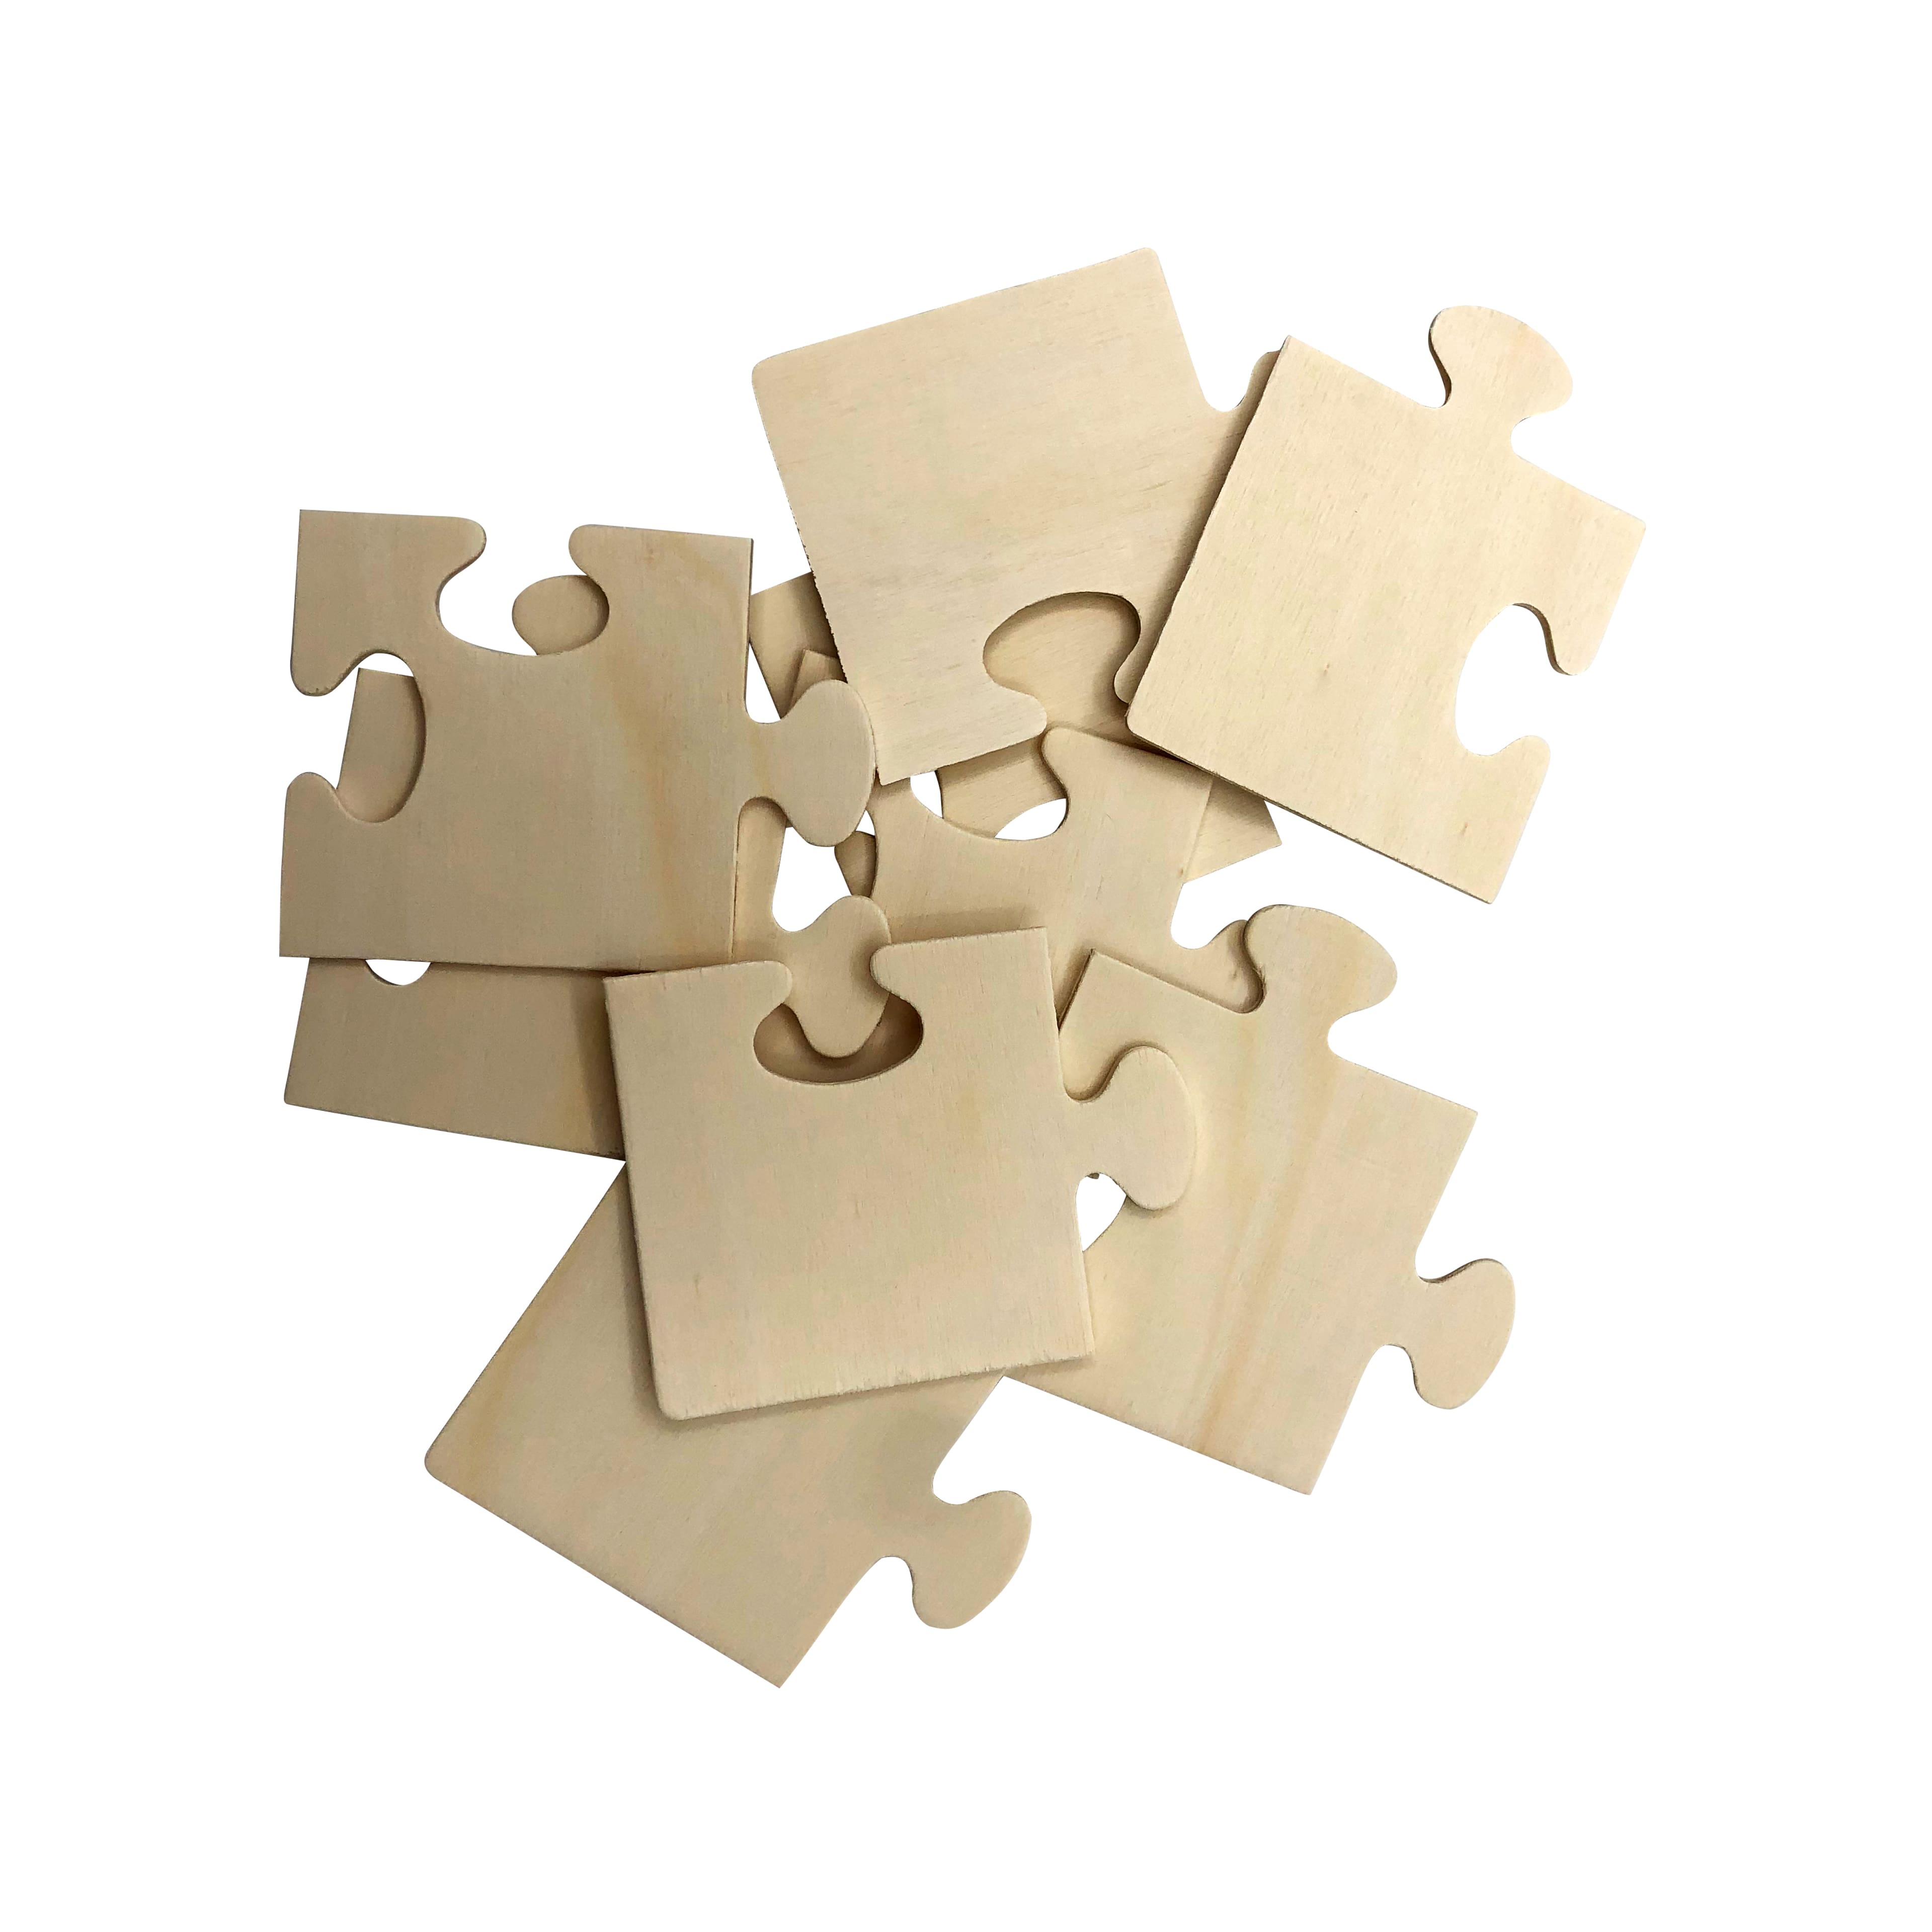 Creatology Wooden Puzzle Shapes - each